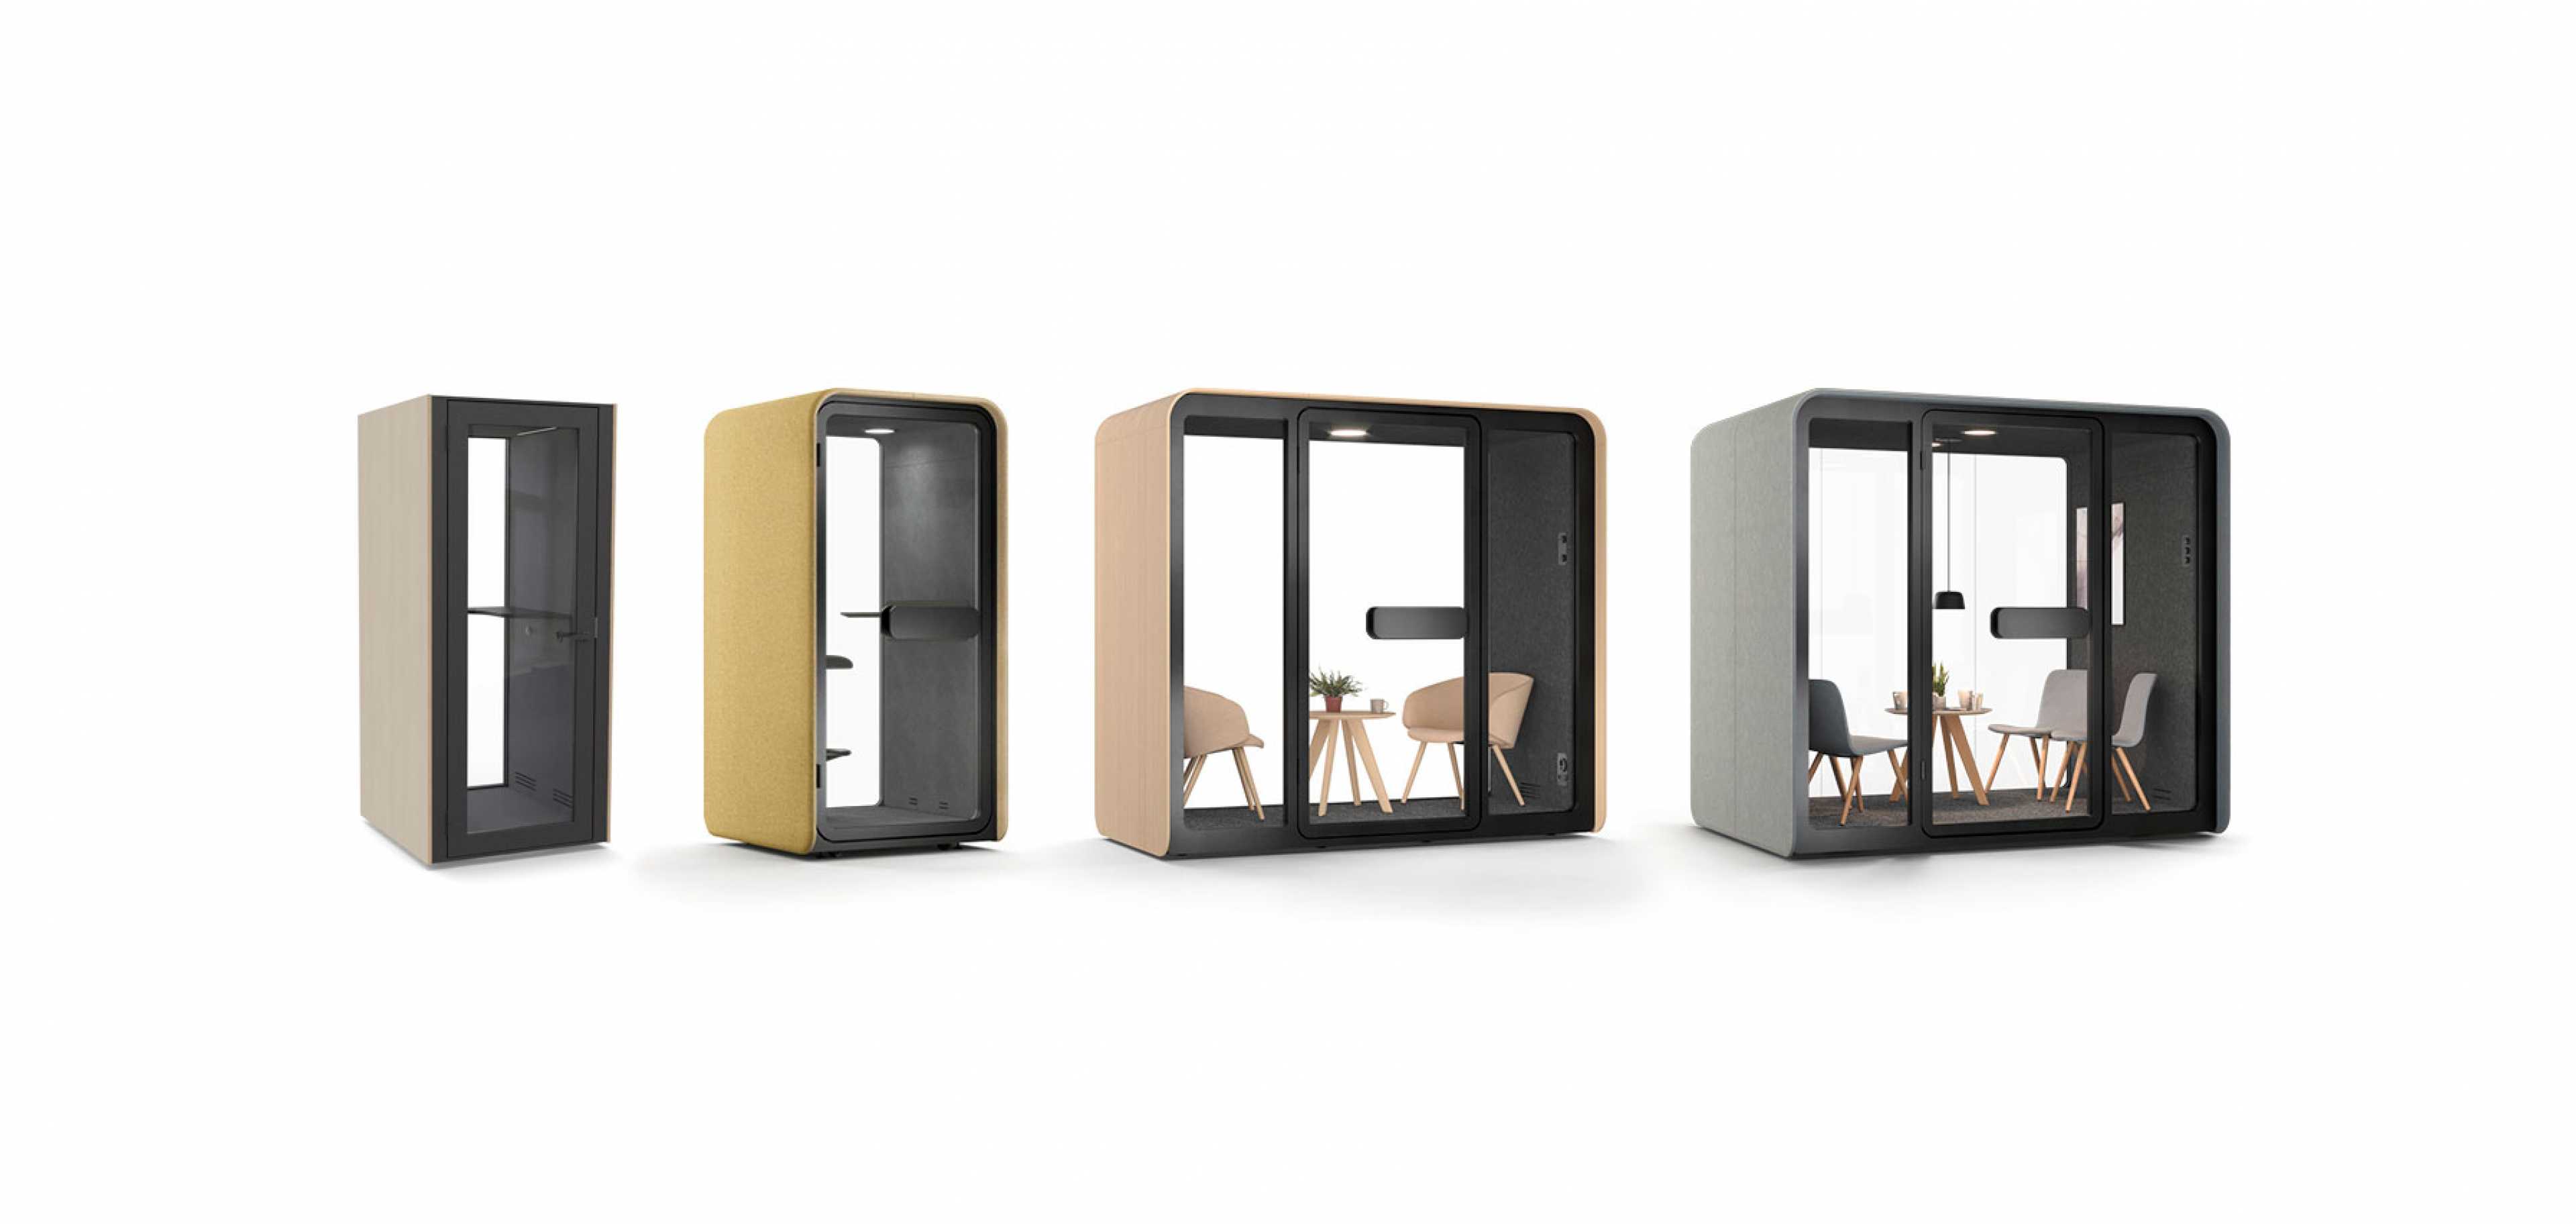 Phone booths and meeting modules by Martela